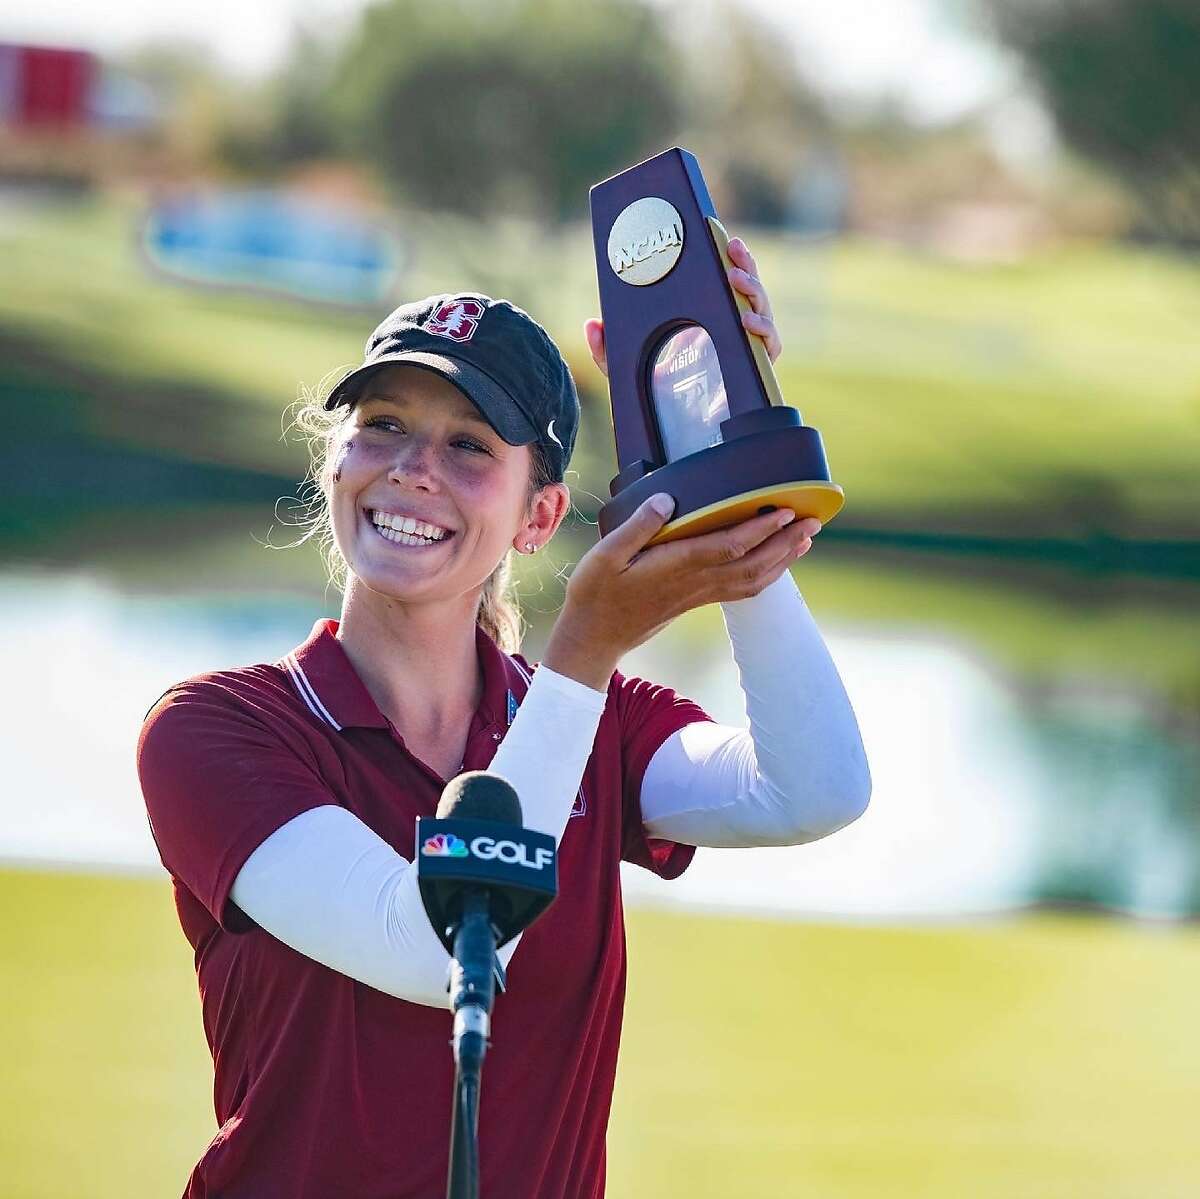 Freshman Rachel Heck became the first Stanford women's golfer to win the NCAA individual championship